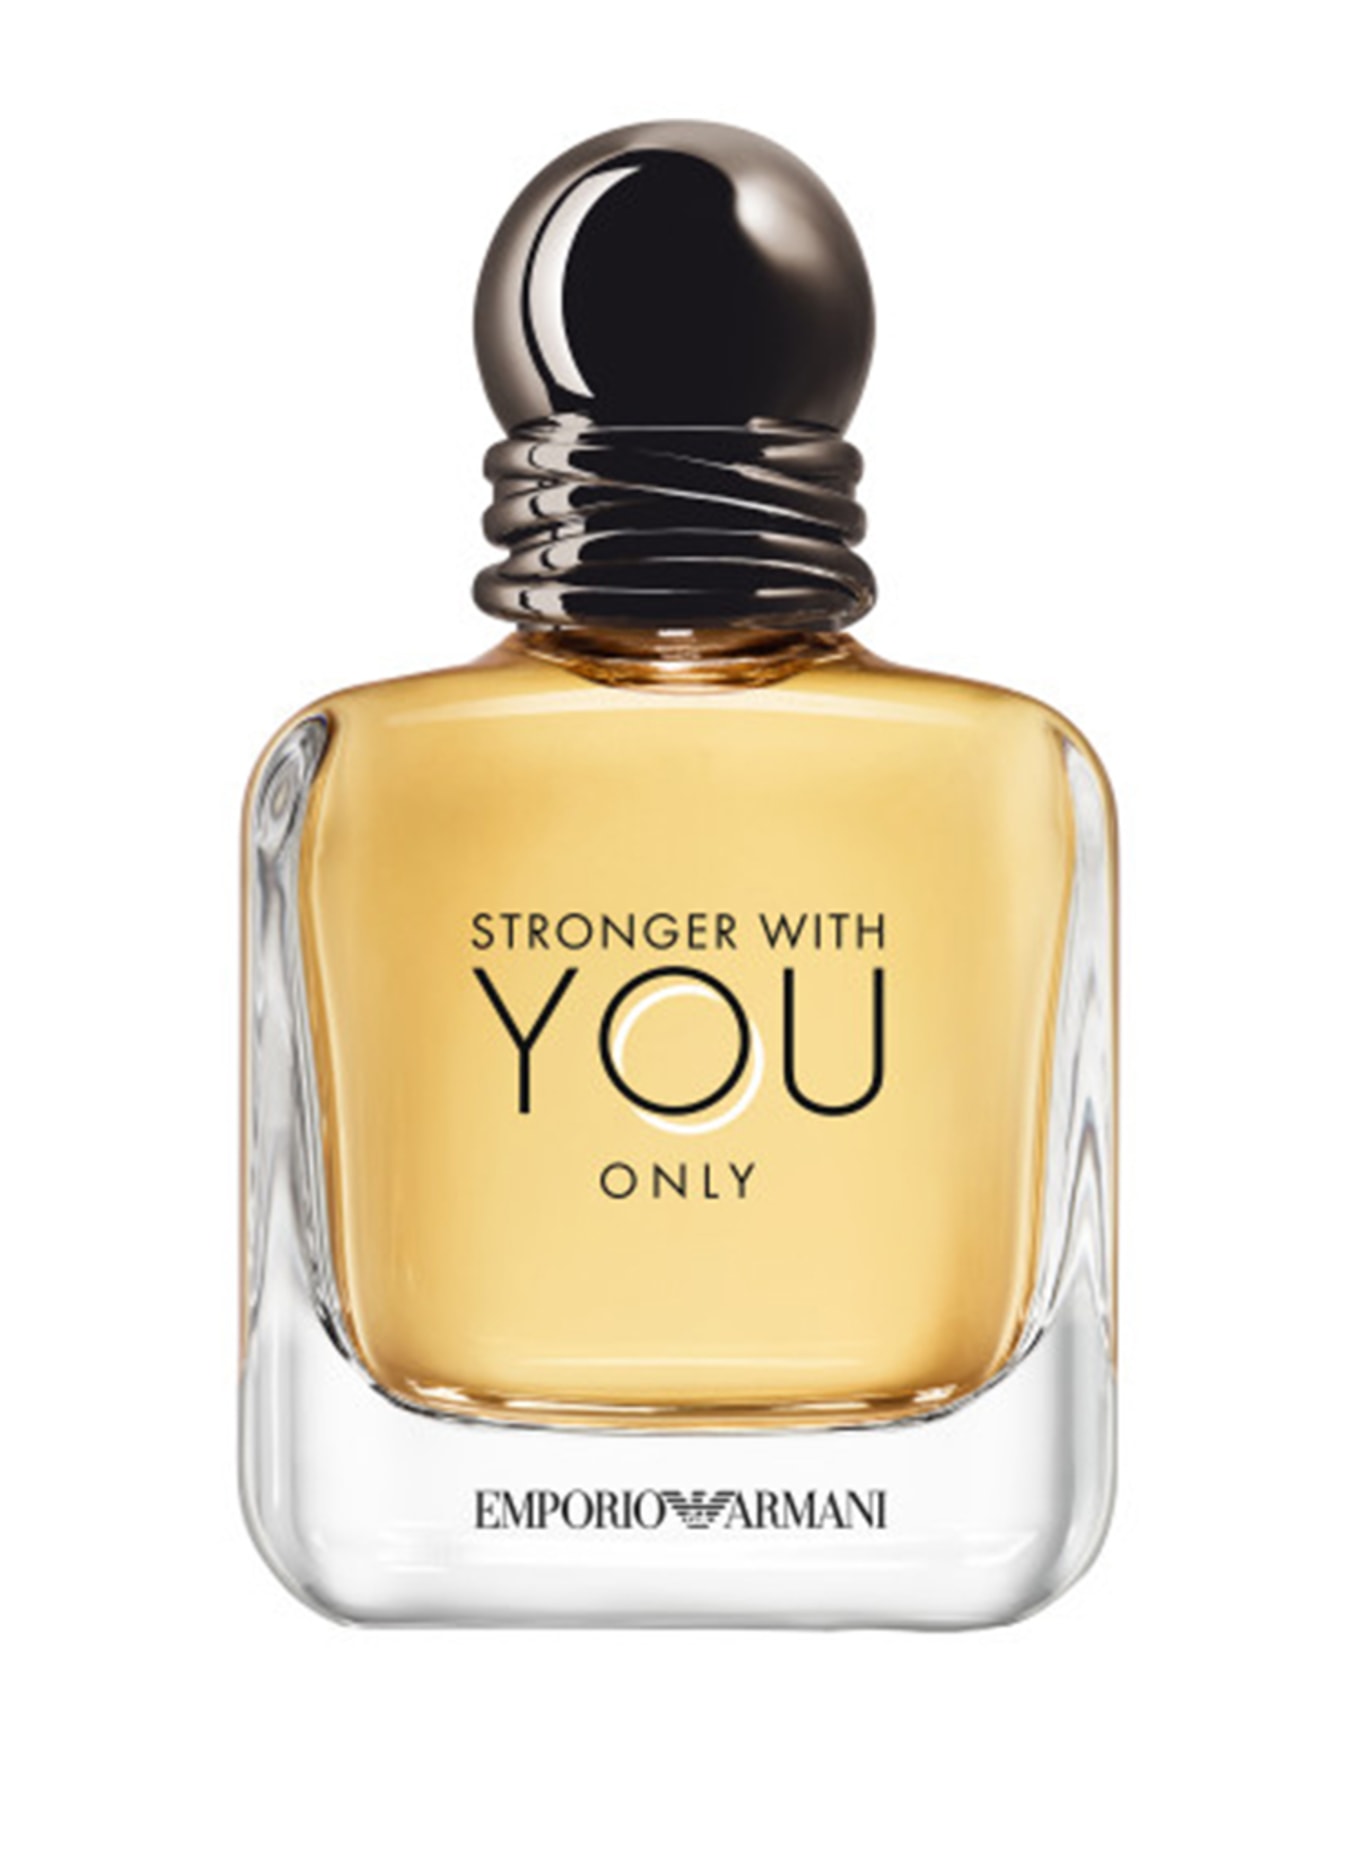 EMPORIO ARMANI STRONGER WITH YOU ONLY (Bild 1)